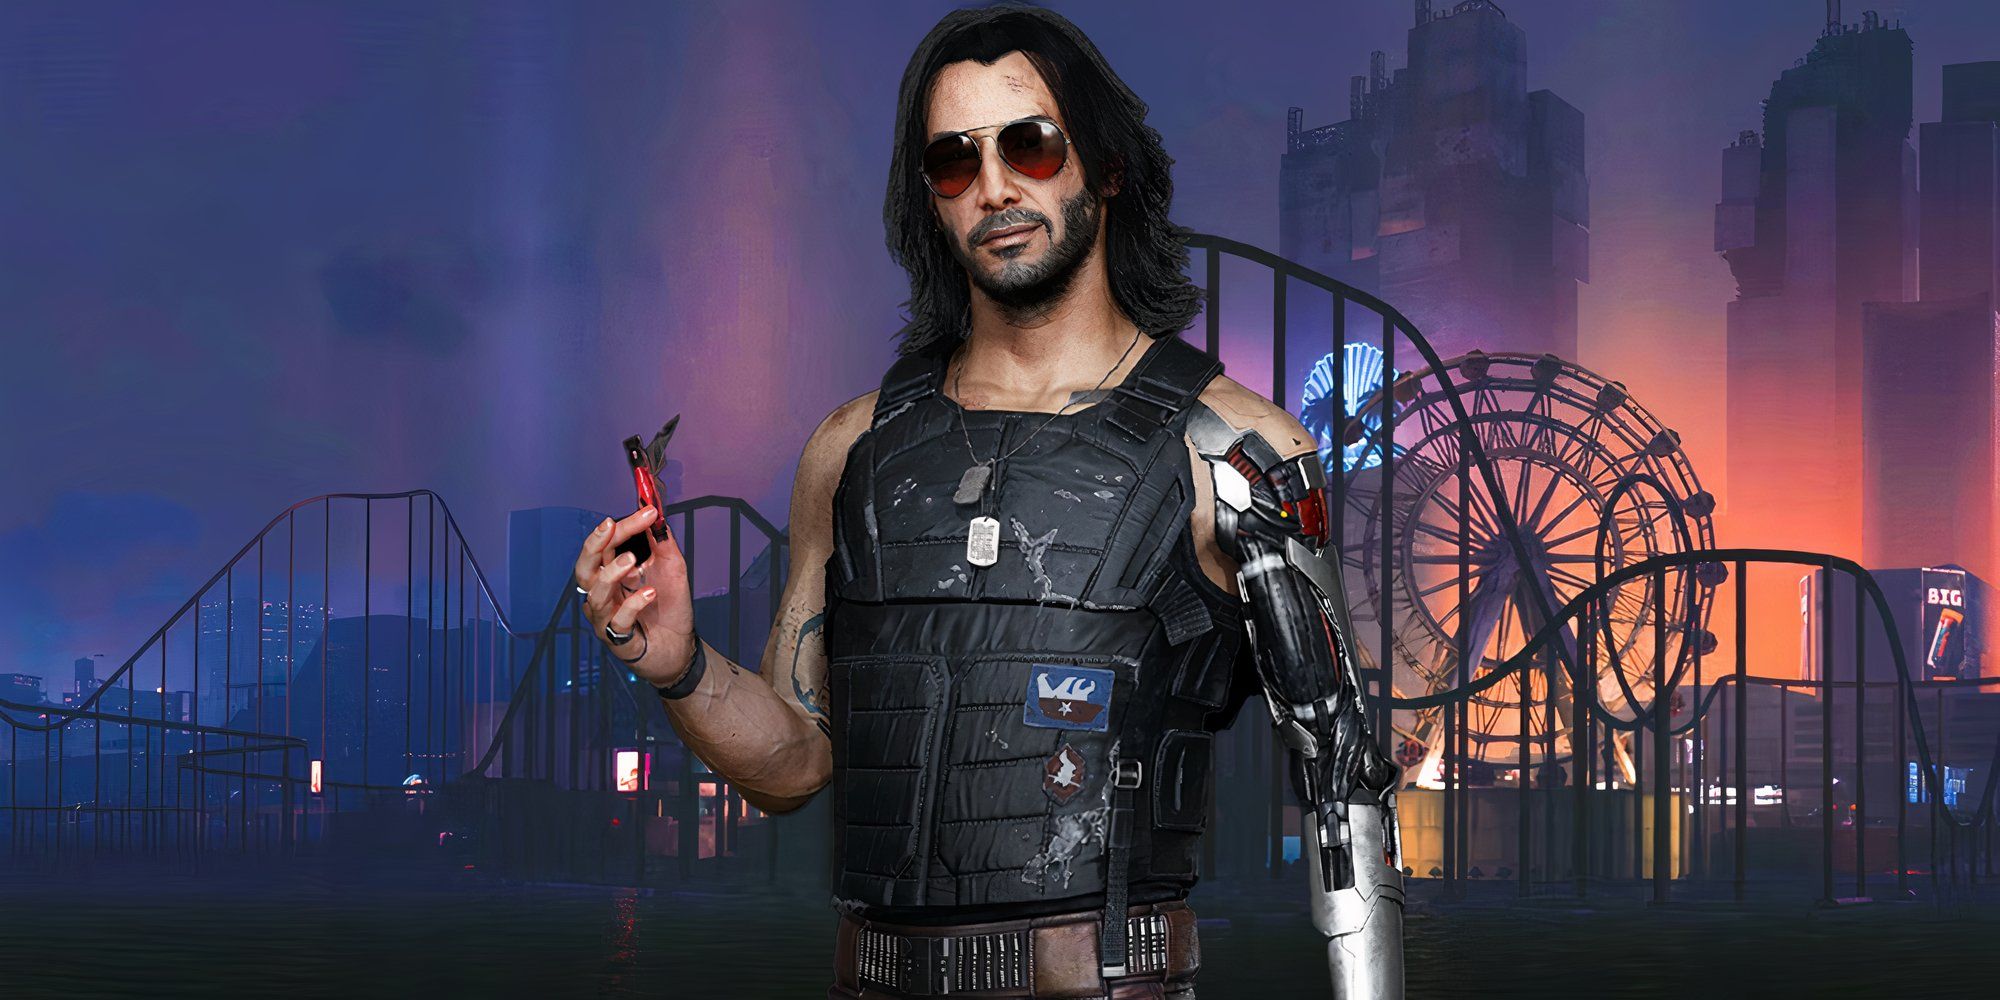 Johnny Silverhand with the boardwalk from Cyberpunk 2077 in the background